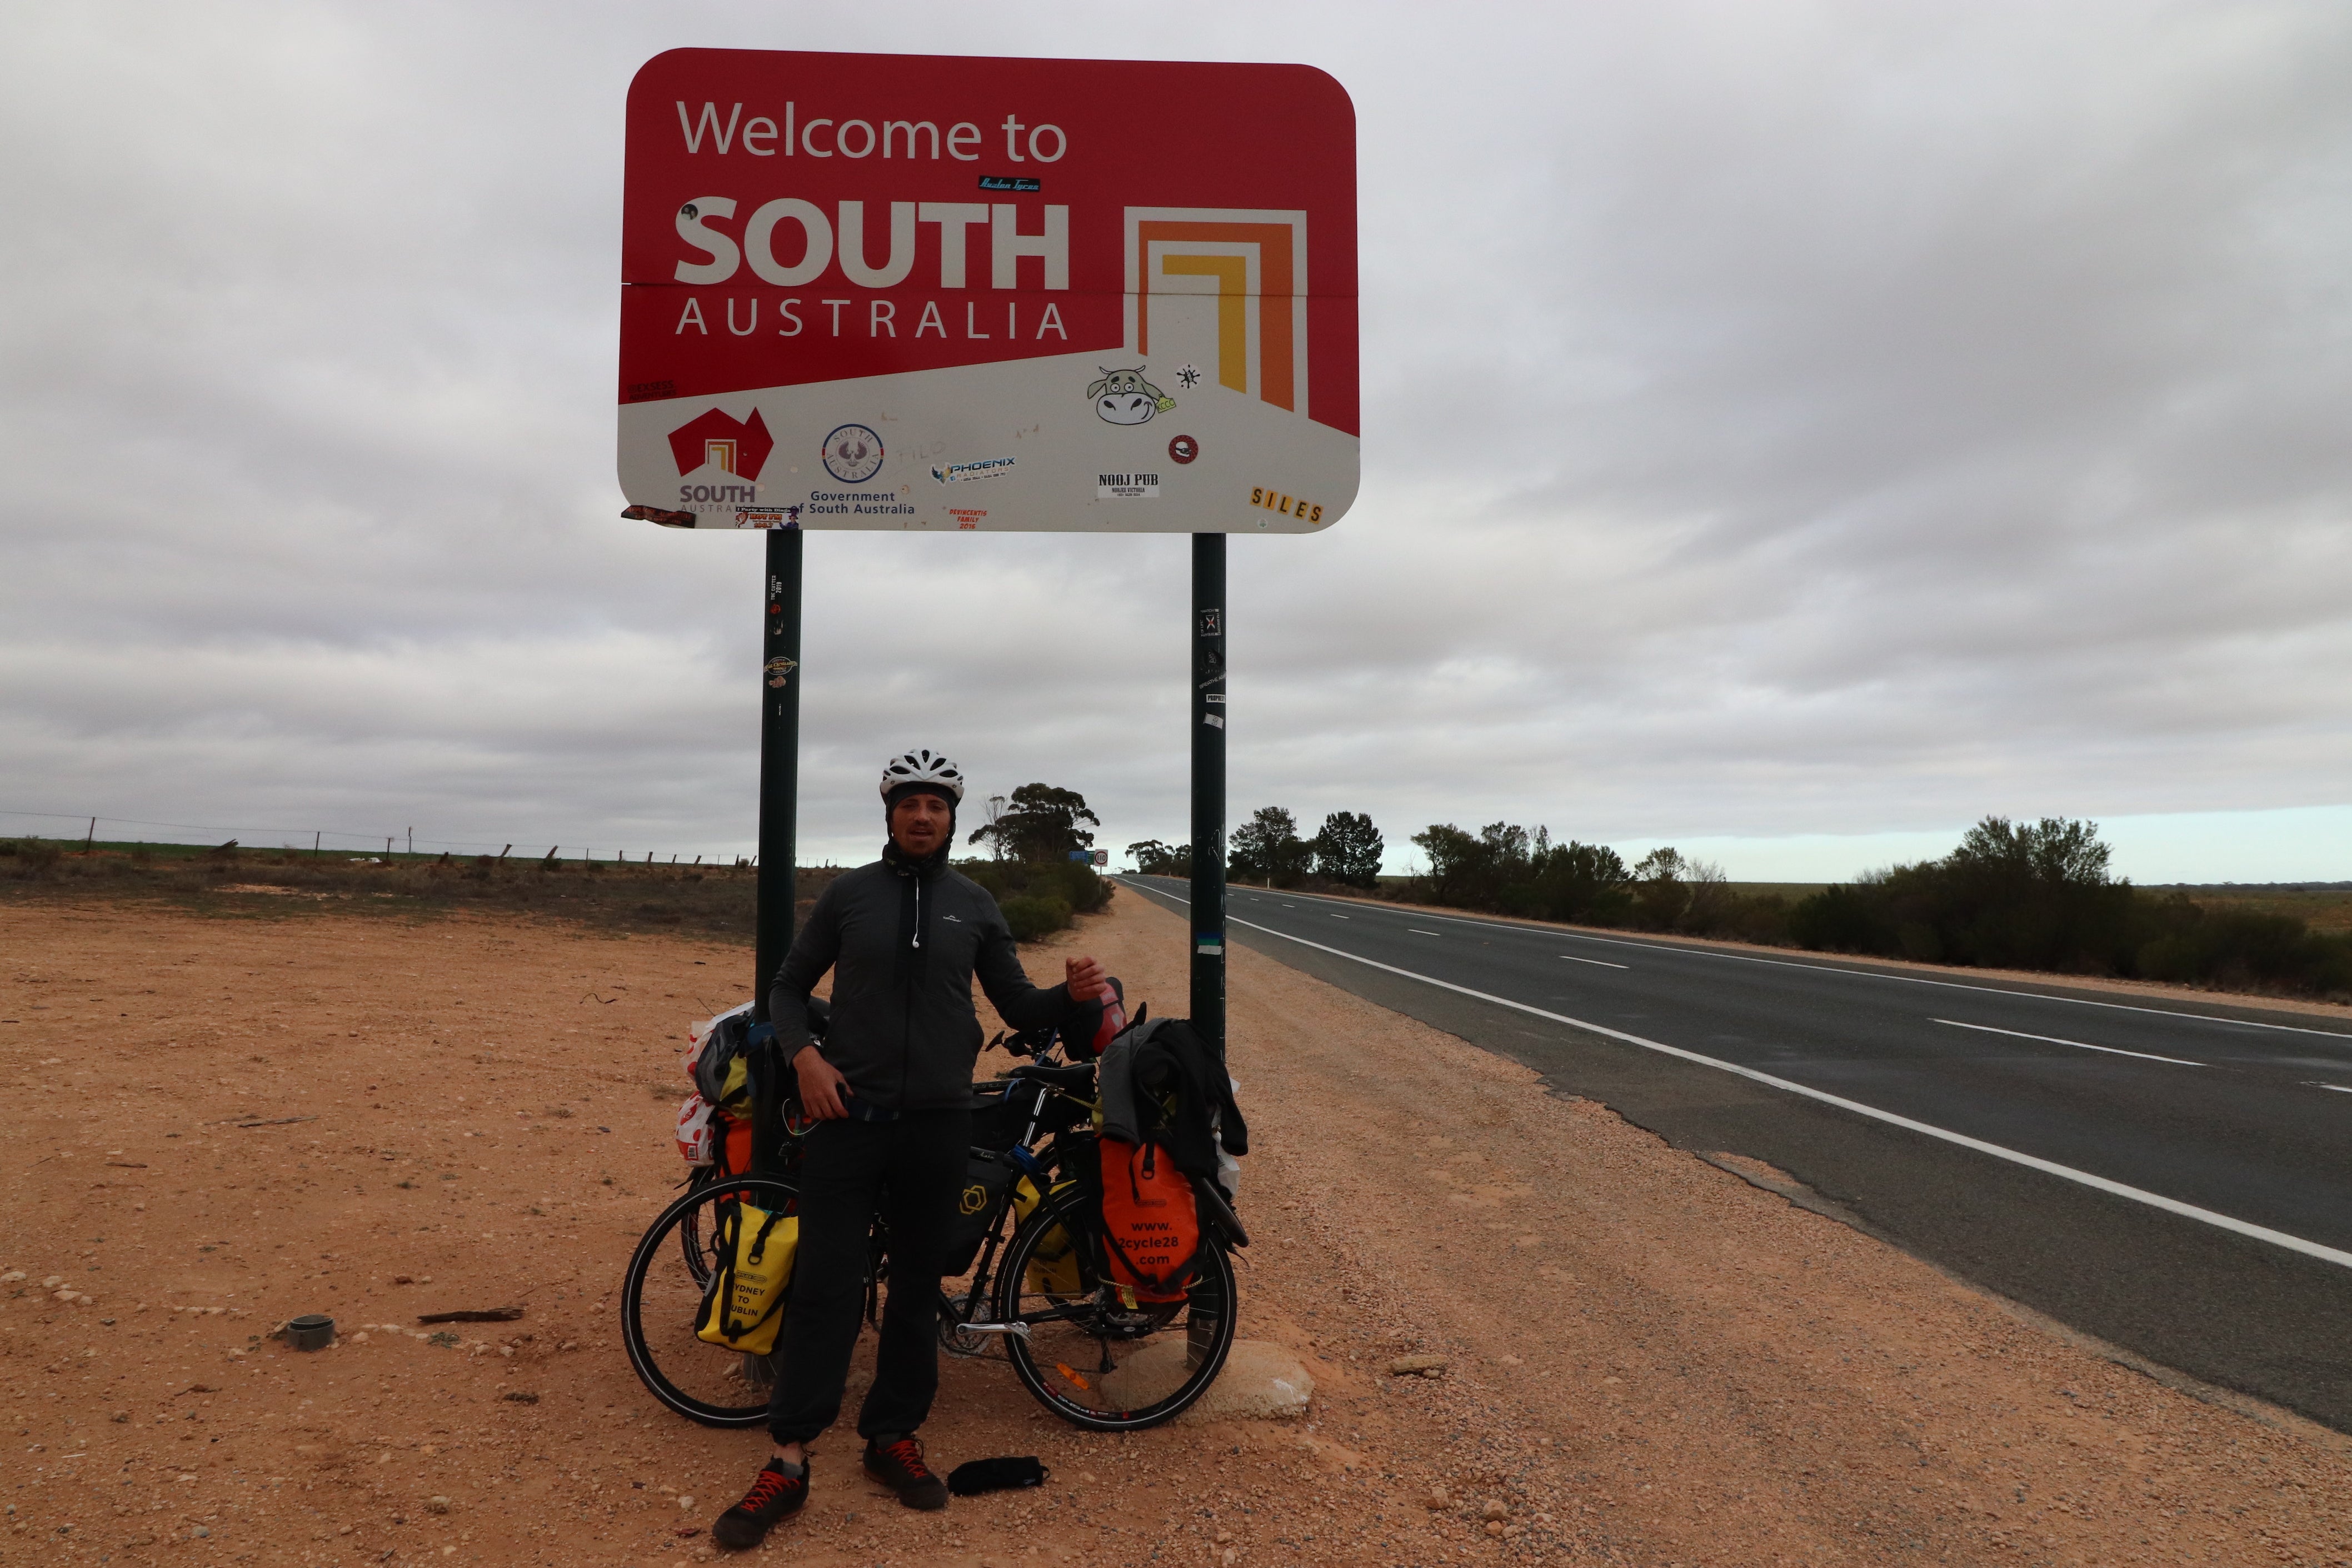 Crossing the border from Victoria to South Australia 